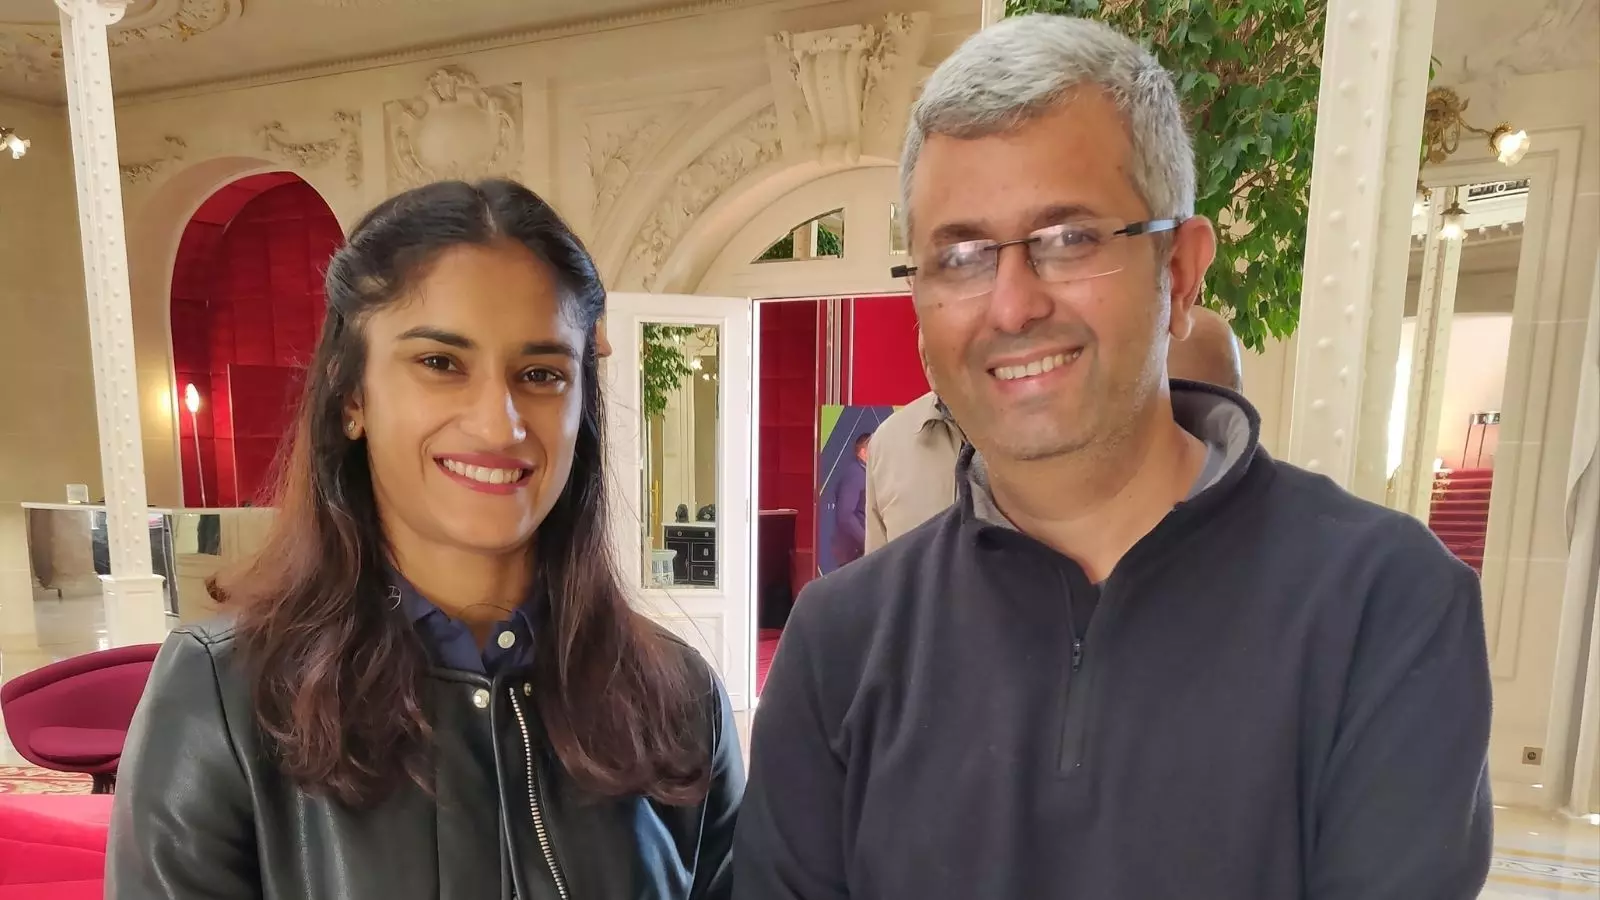 The author with Vinesh Phogat at the Laureus Sports Awards in Monaco in 2019